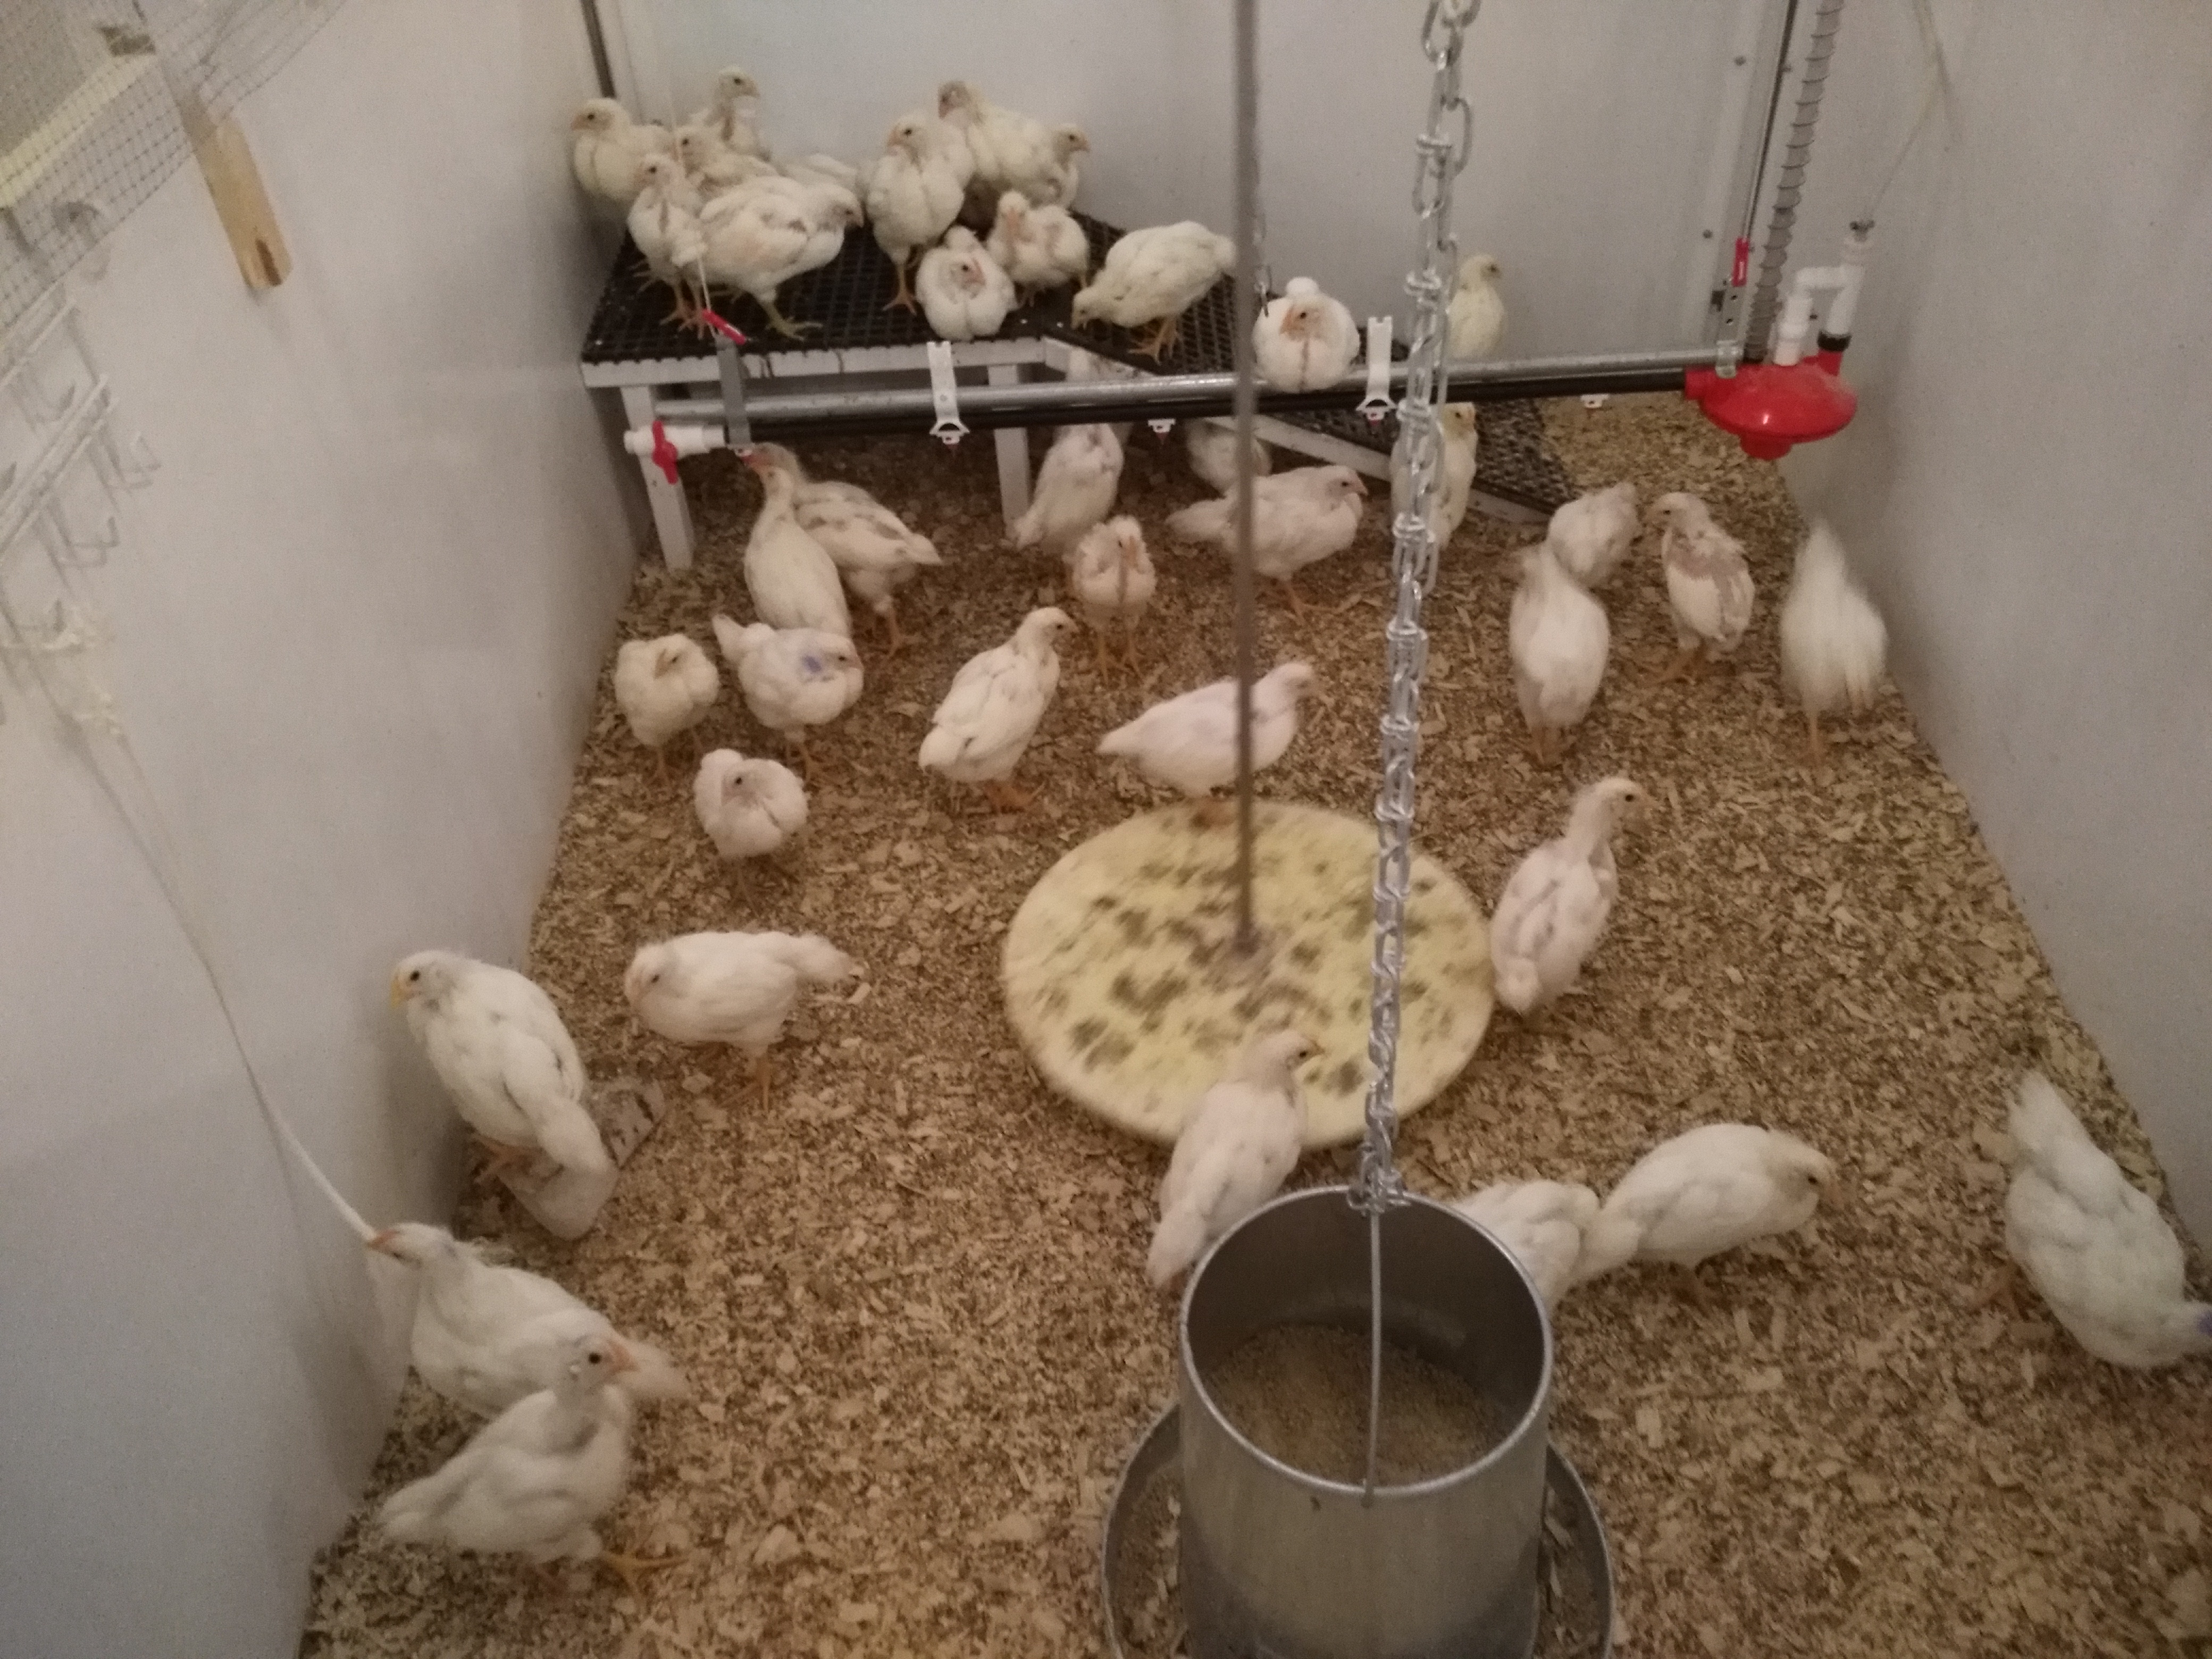 Chickens in experimental pen from study conducted by Widowski and Torrey